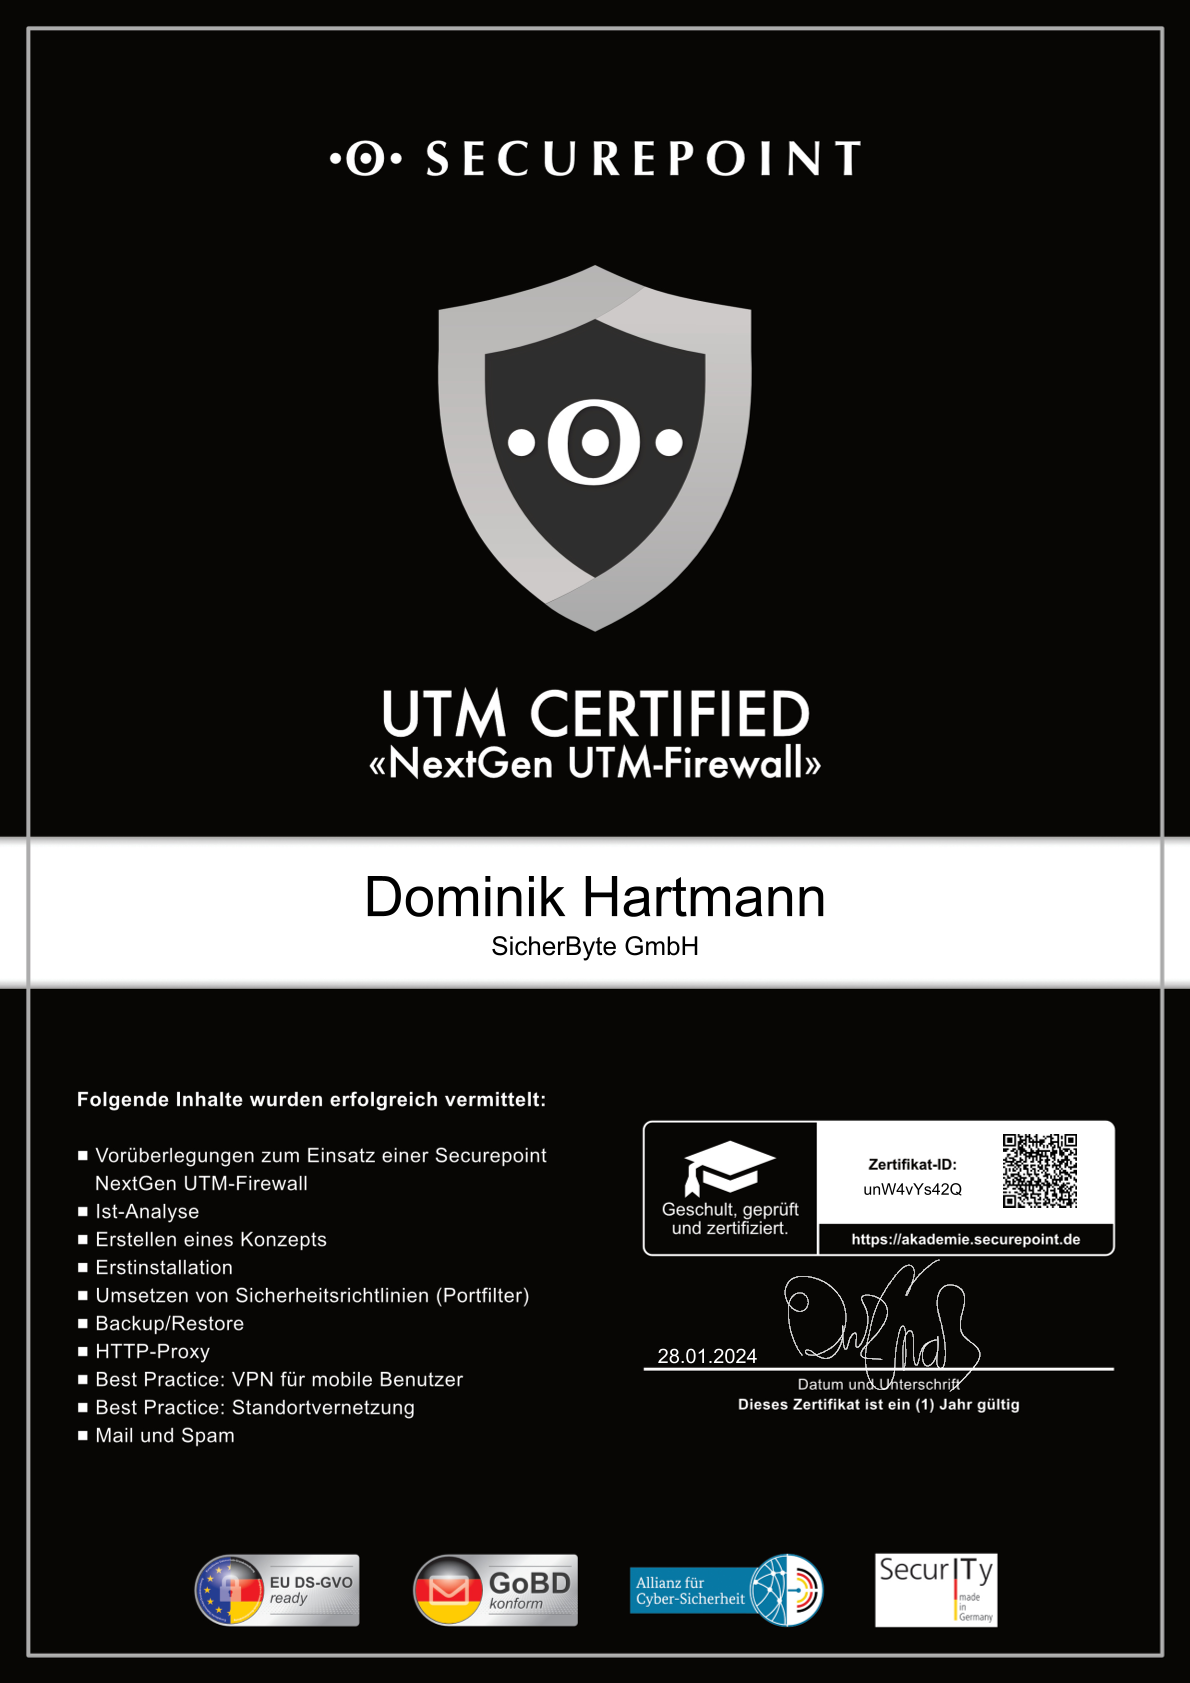 Securepoint UTM Certified